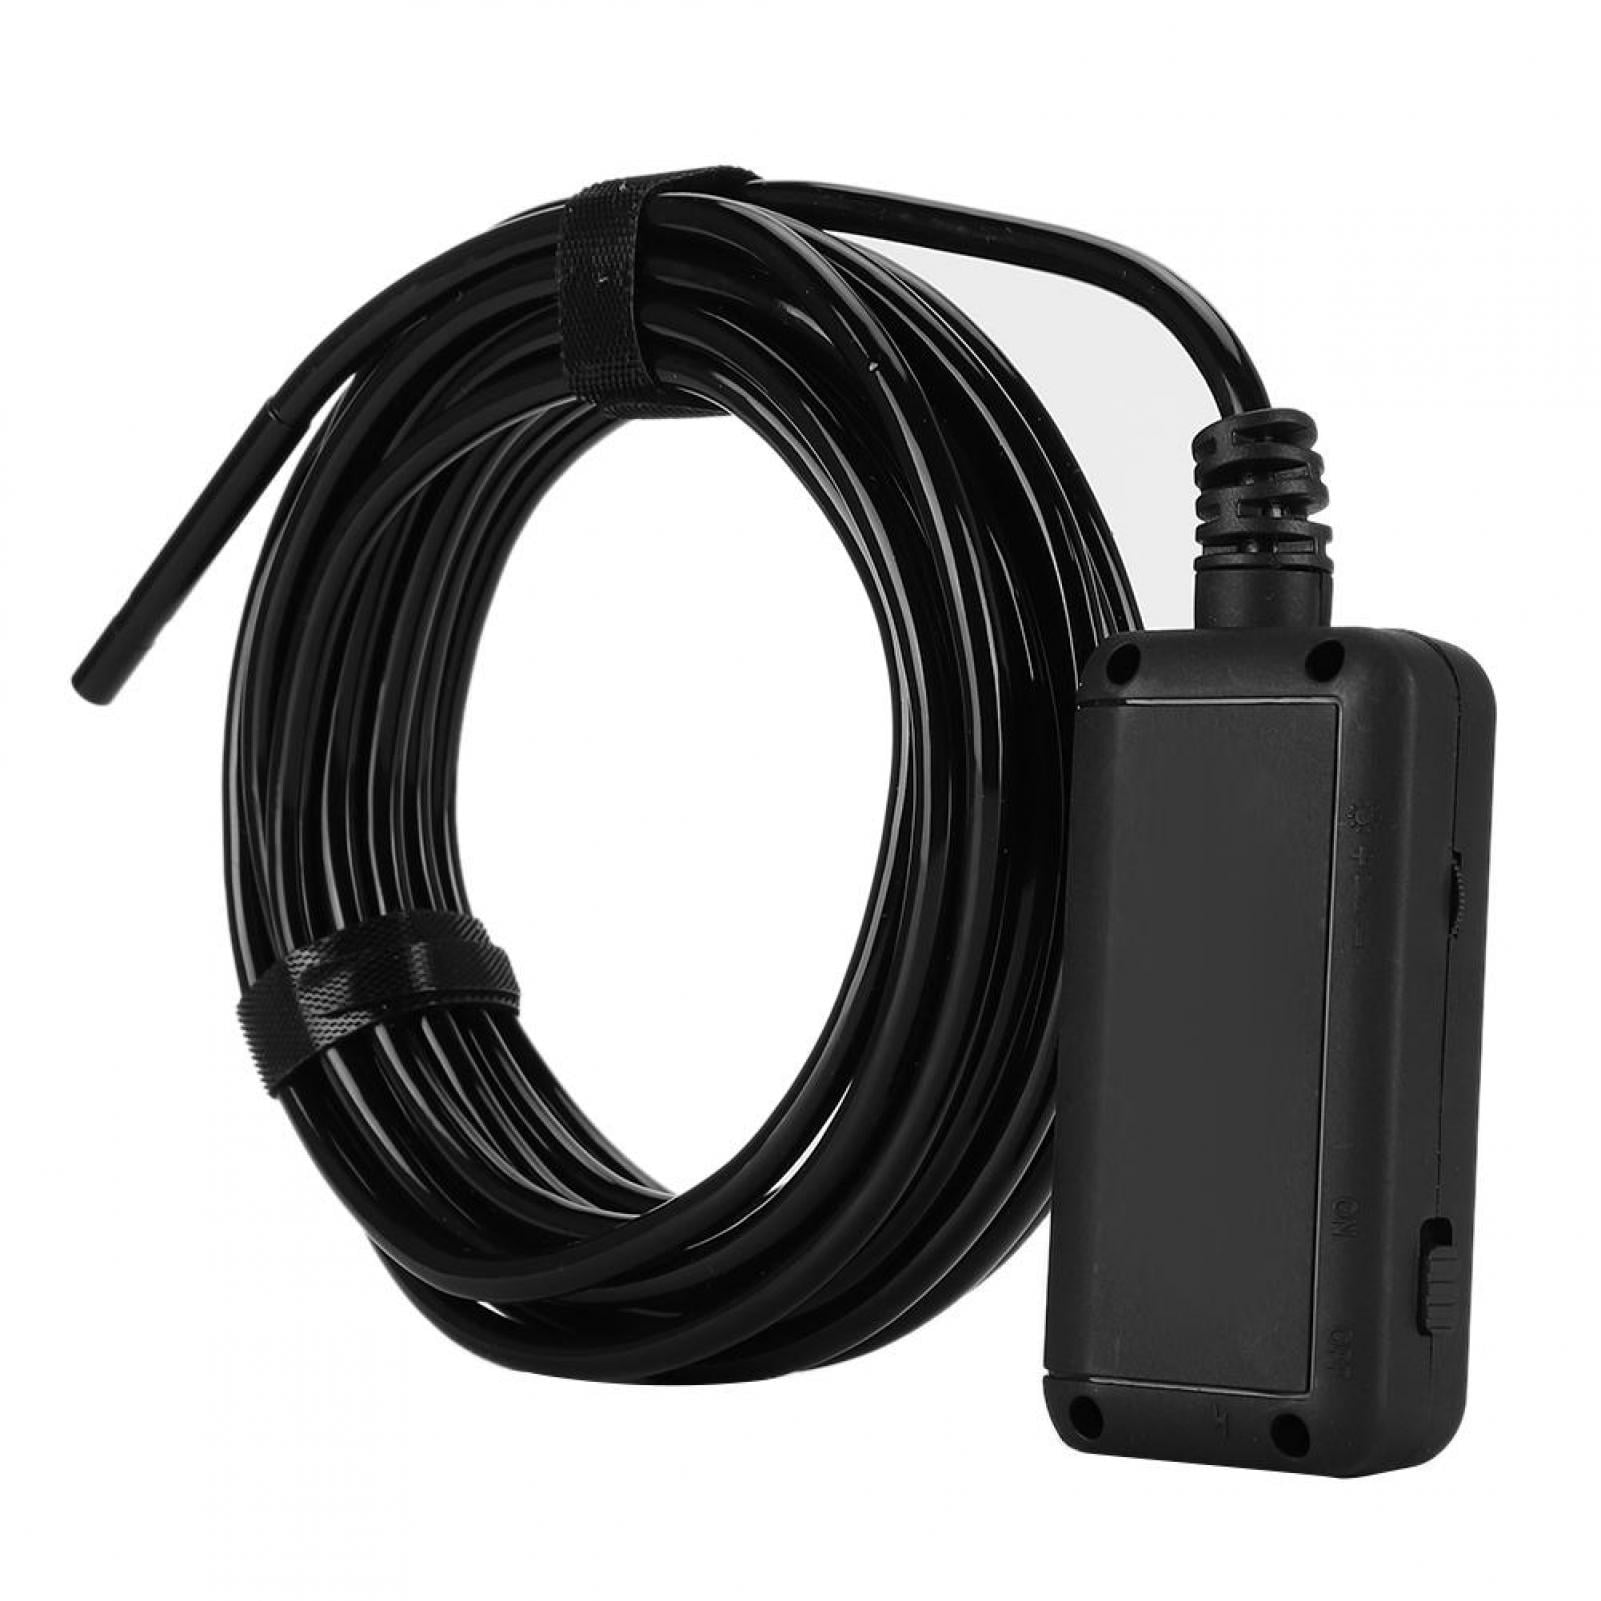 2-10m WiFi Endoscope 6 LEDs 5MP HD Endoscope Inspection Camera for iOS/Android 